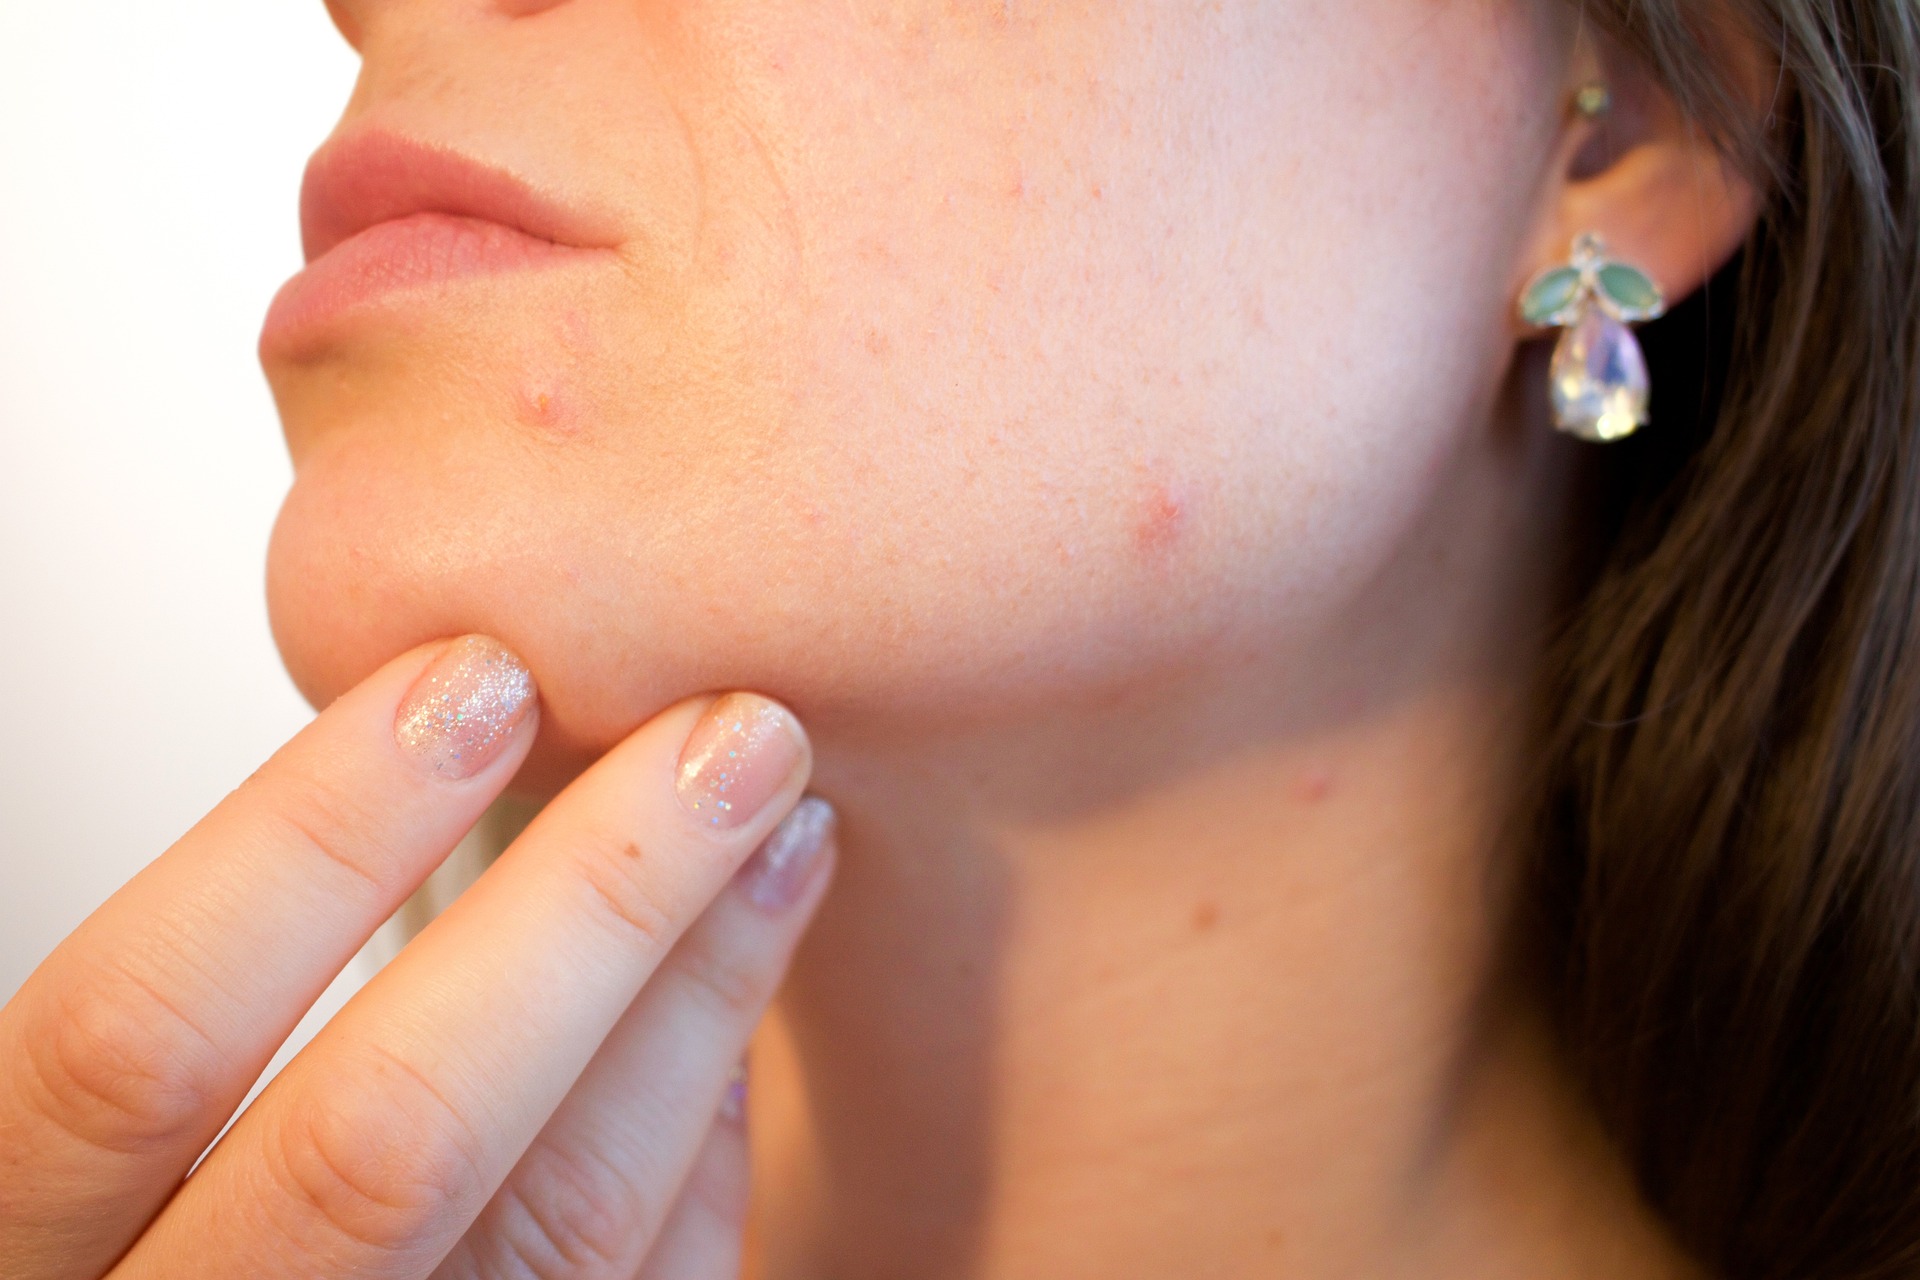 Pimple Popping Can Cause Scarring – Here’s What Doctors Recommend Instead